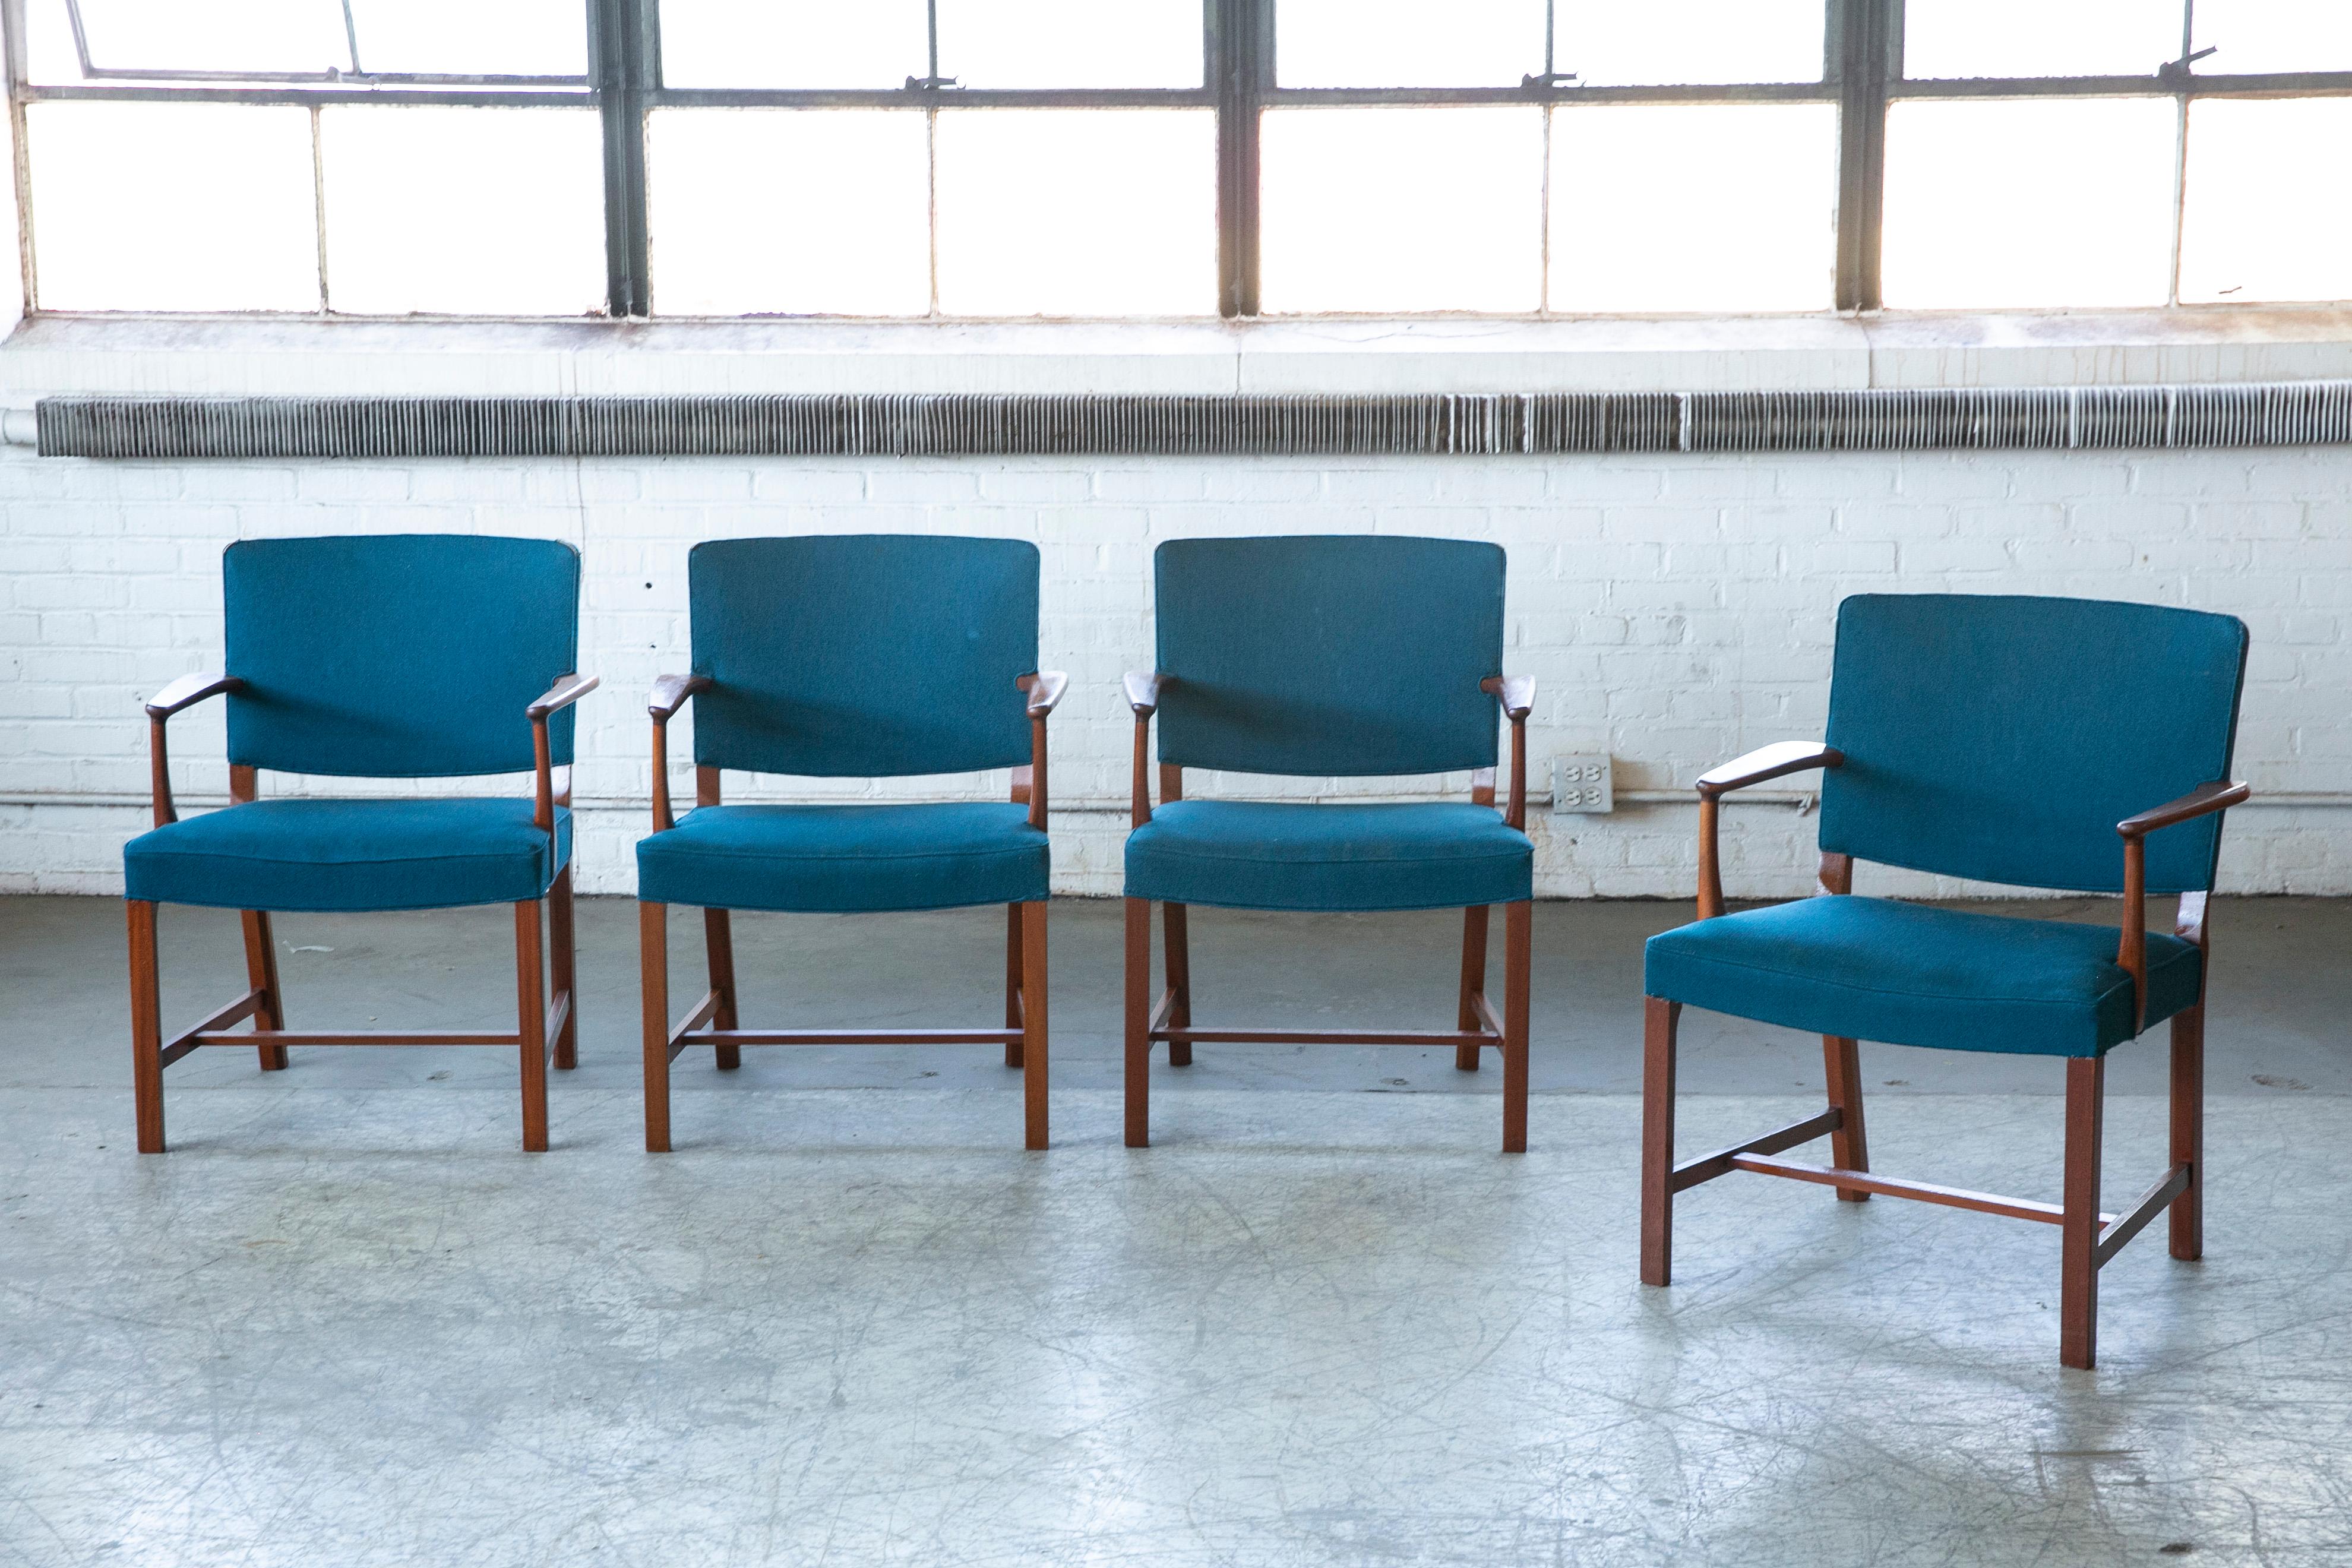 Classic elegant Danish armchairs from the 1940s by Furniture Maker, Erik Bjørn Olsen and produced by his own firm. The chairs were originally delivered to the Danish High Court, Eastern District in Bernstorffs Palæ in Copenhagen. Mr. Olsen was a